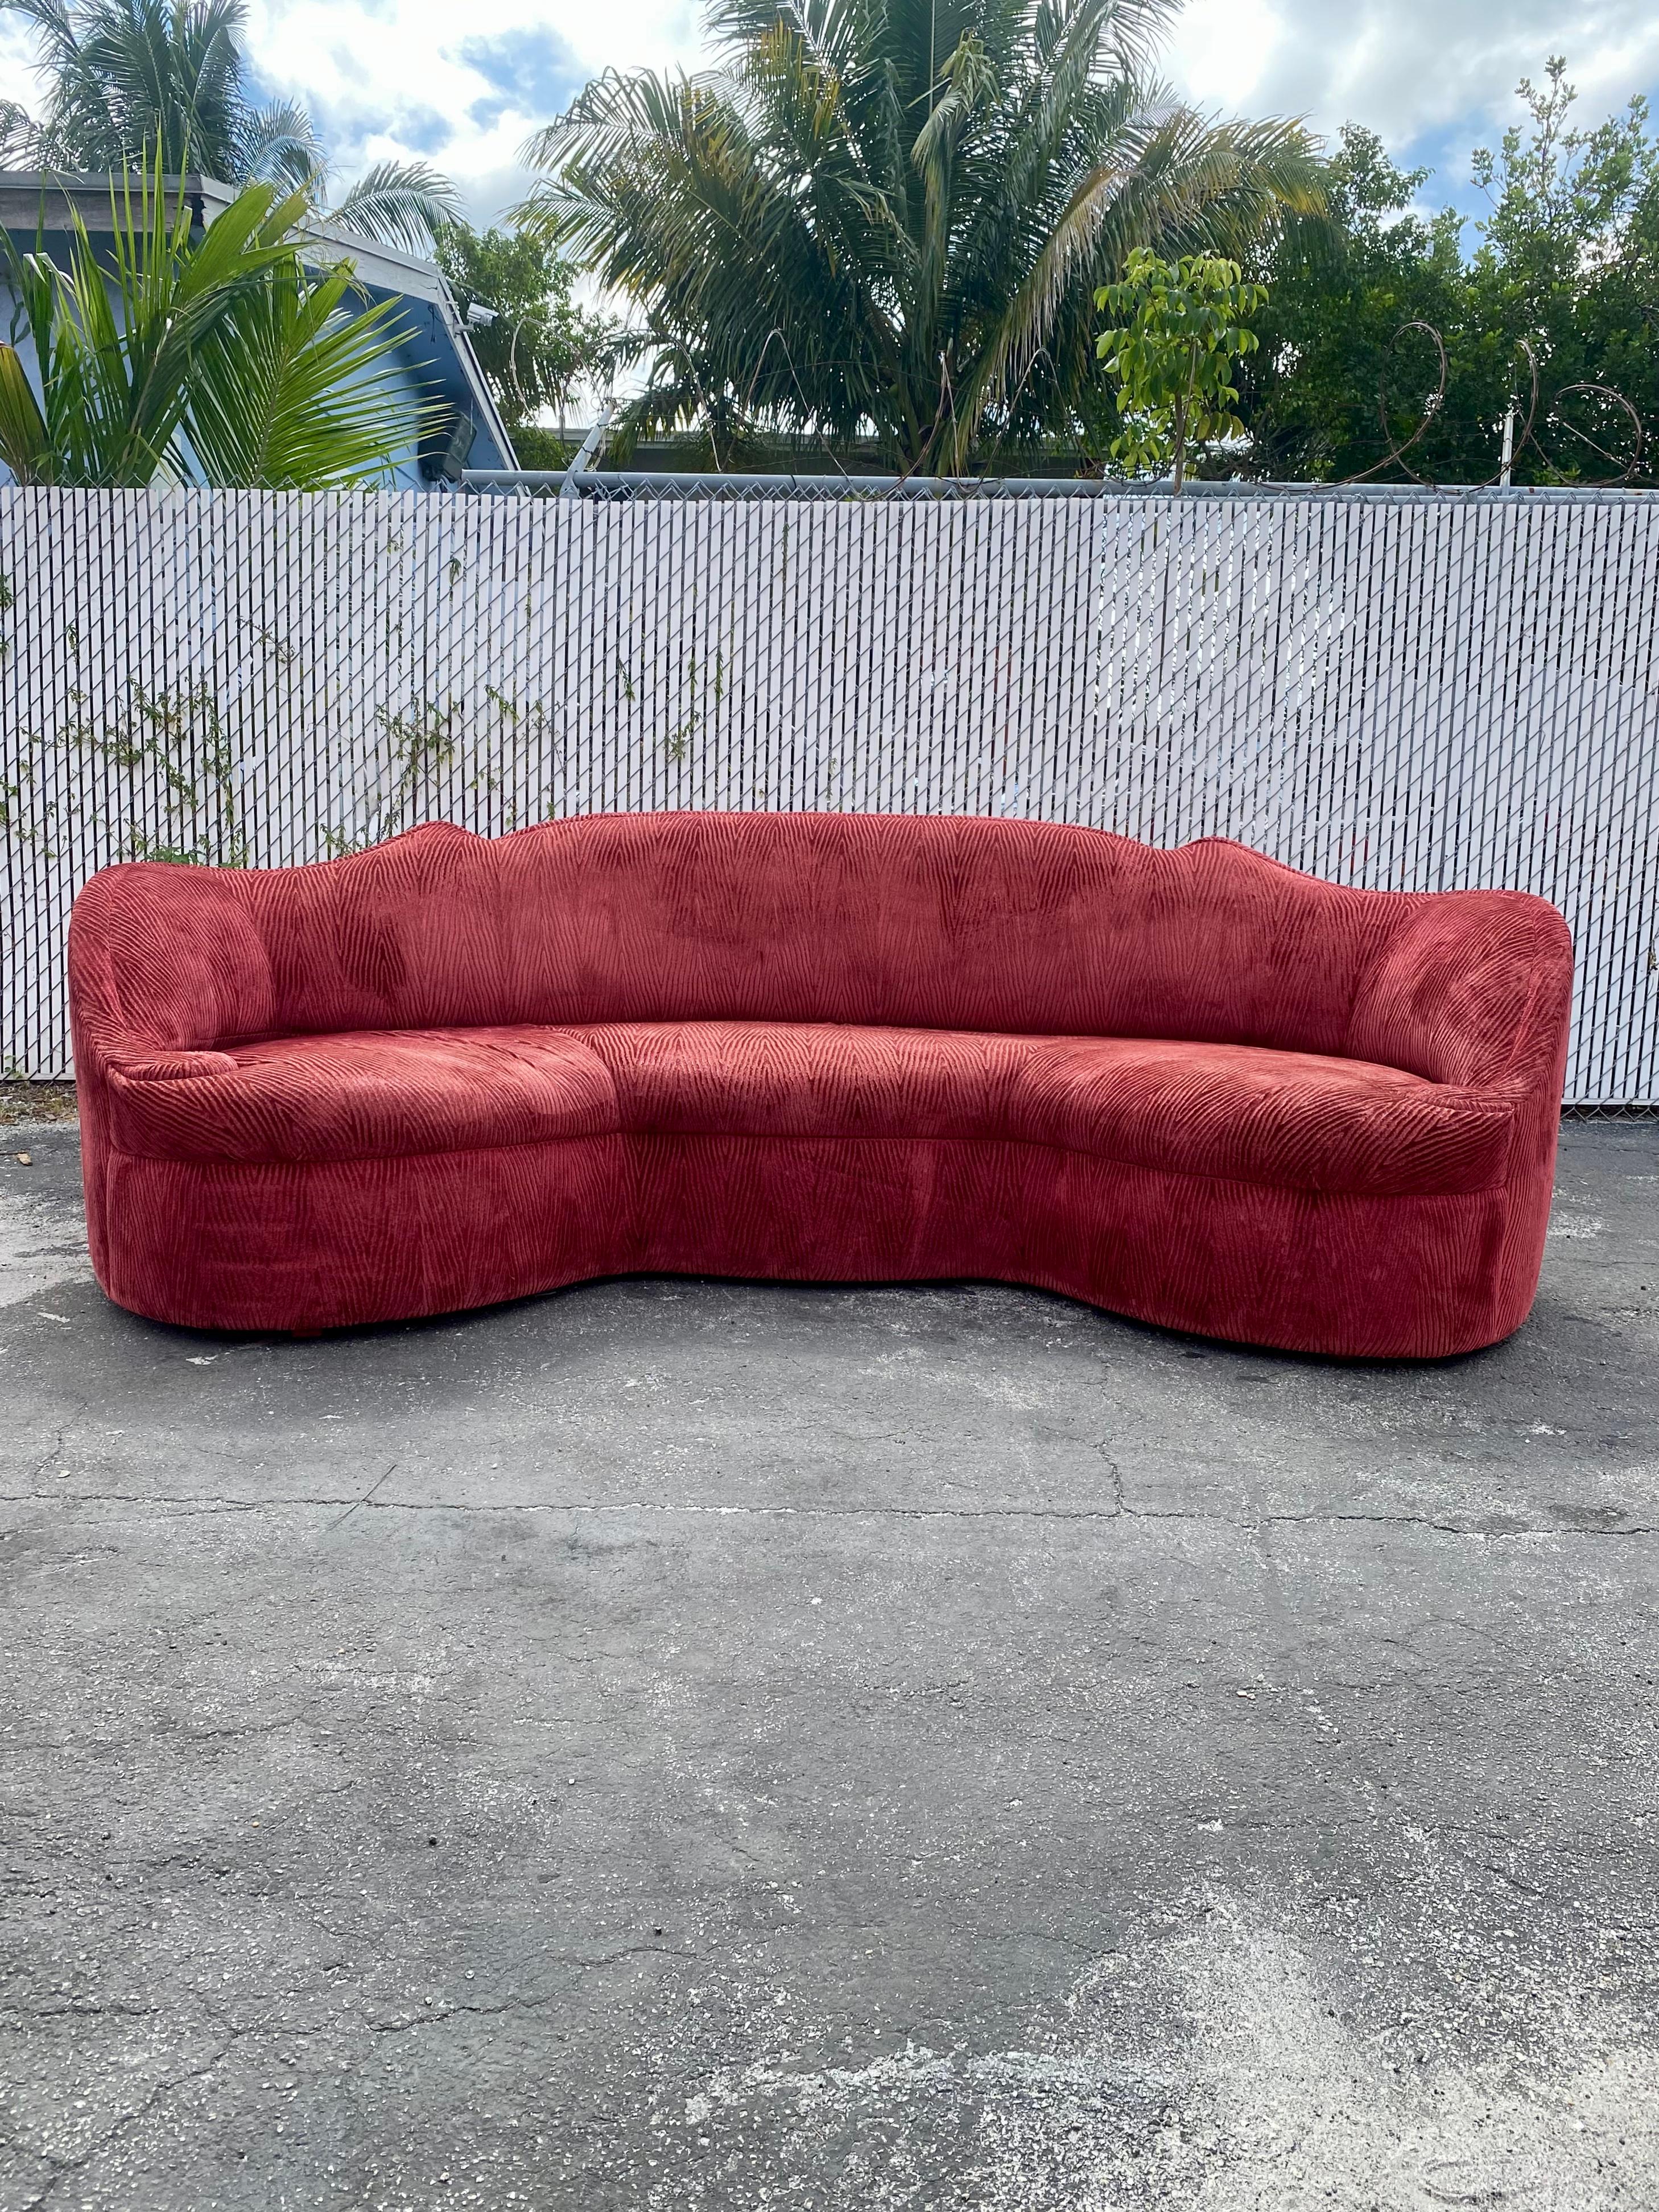 On offer on this occasion is one of the most stunning sofa you could hope to find. This is an ultra-rare opportunity to acquire what is, unequivocally, the best of the best, it being a most spectacular and beautifully-presented sectional.